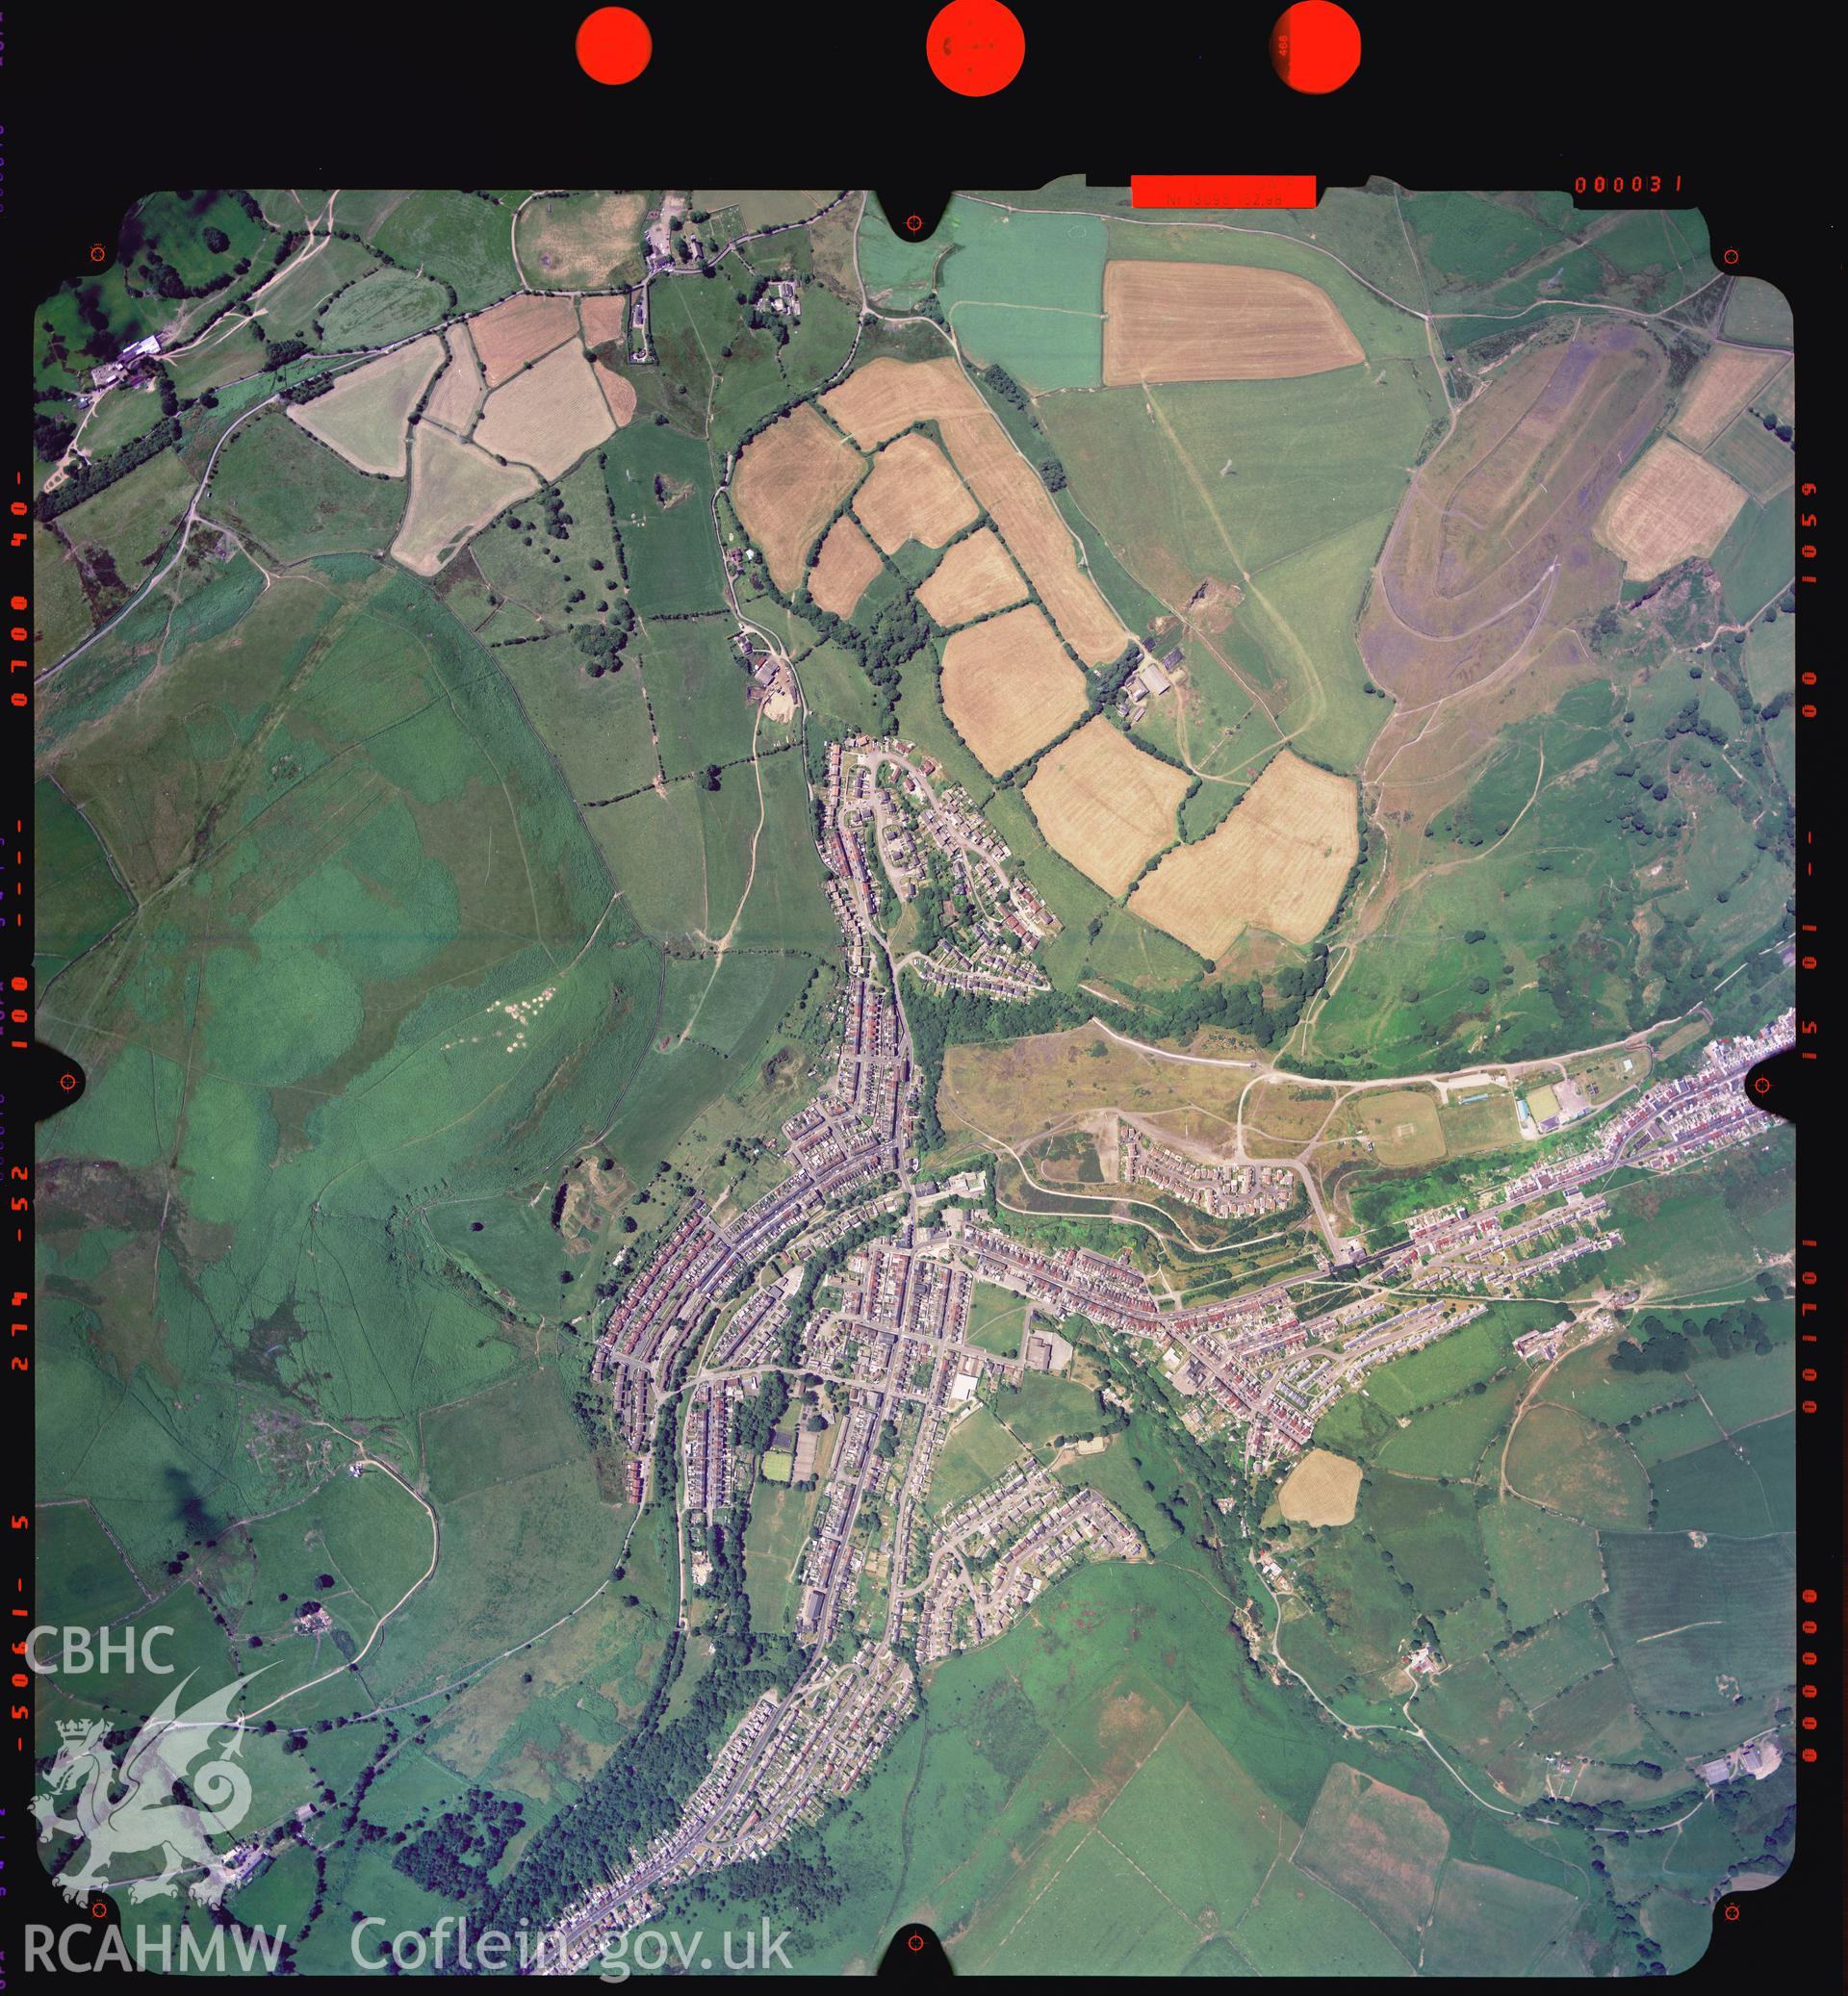 Digitized copy of a colour aerial photograph showing the area around Abertridwr, taken by Ordnance Survey, 2003.